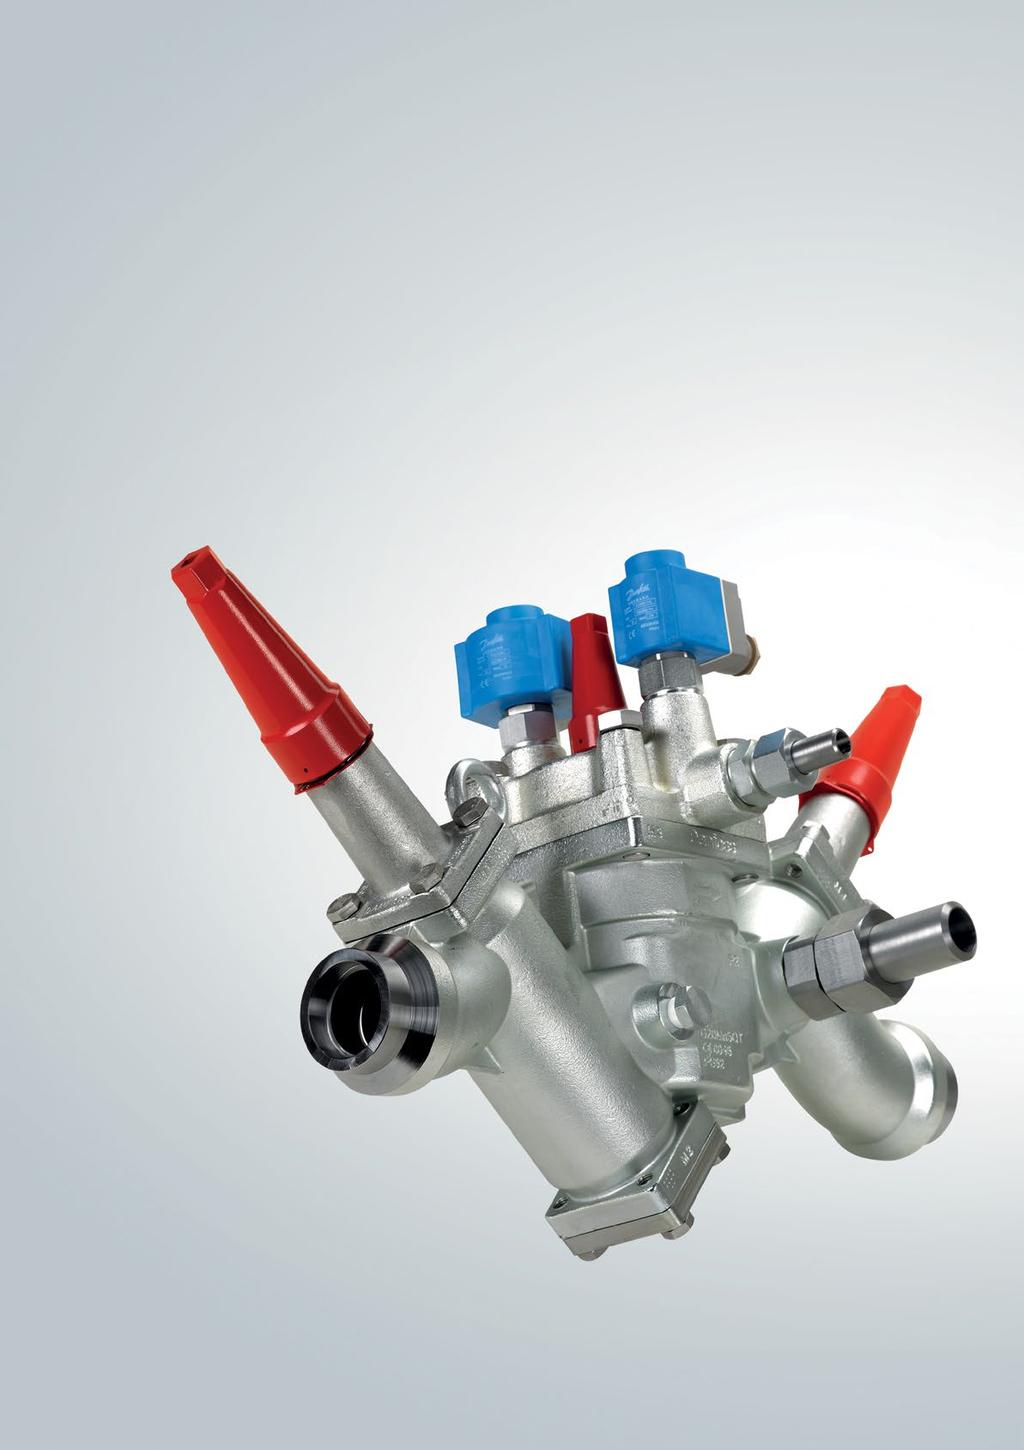 New ICF 50-4 and ICF 65-3: A great valve family just got greater Danfoss extends its successful ICF Flexline valve range to include